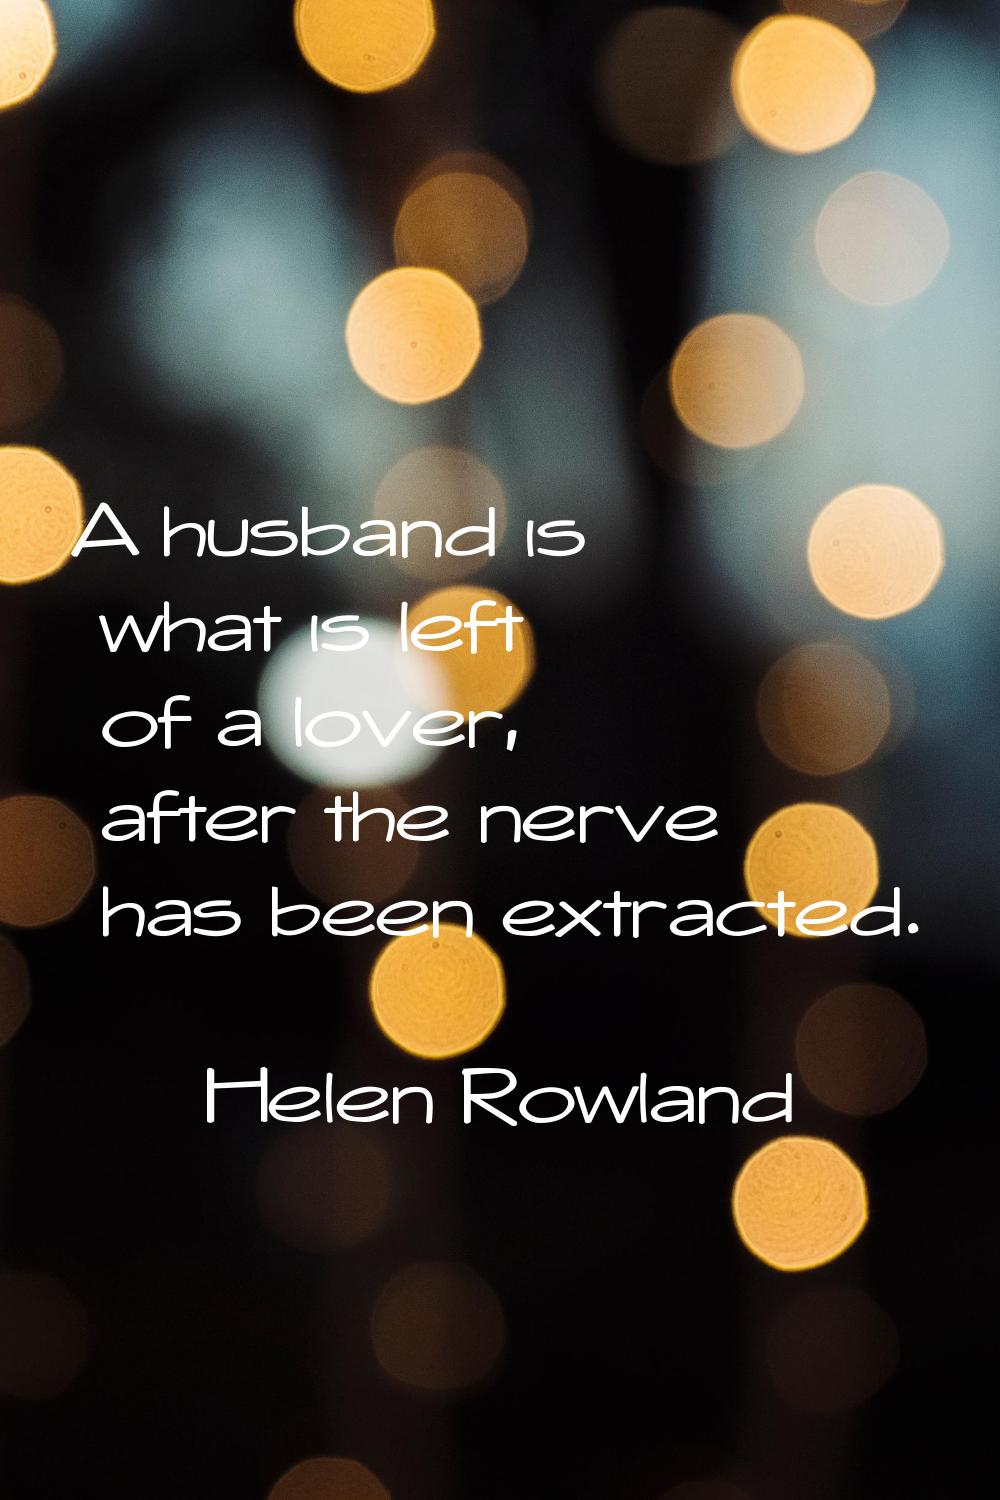 A husband is what is left of a lover, after the nerve has been extracted.